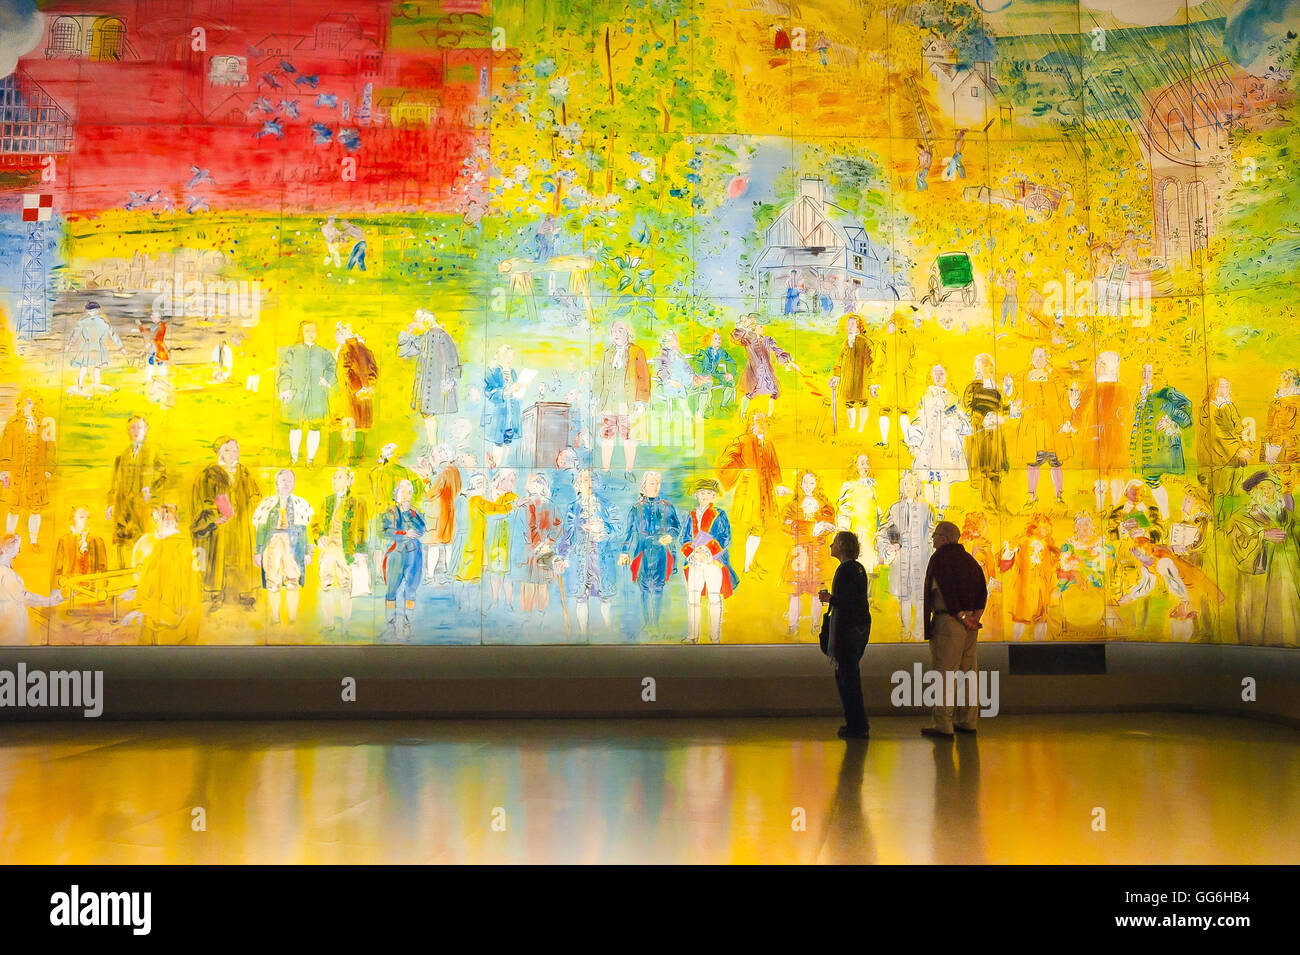 Paris art museum, a senior couple view a giant illuminated mural of Raoul Duffy's 'La Fee Electricite' in the Musee d'Art Moderne (MAM), Paris, France Stock Photo